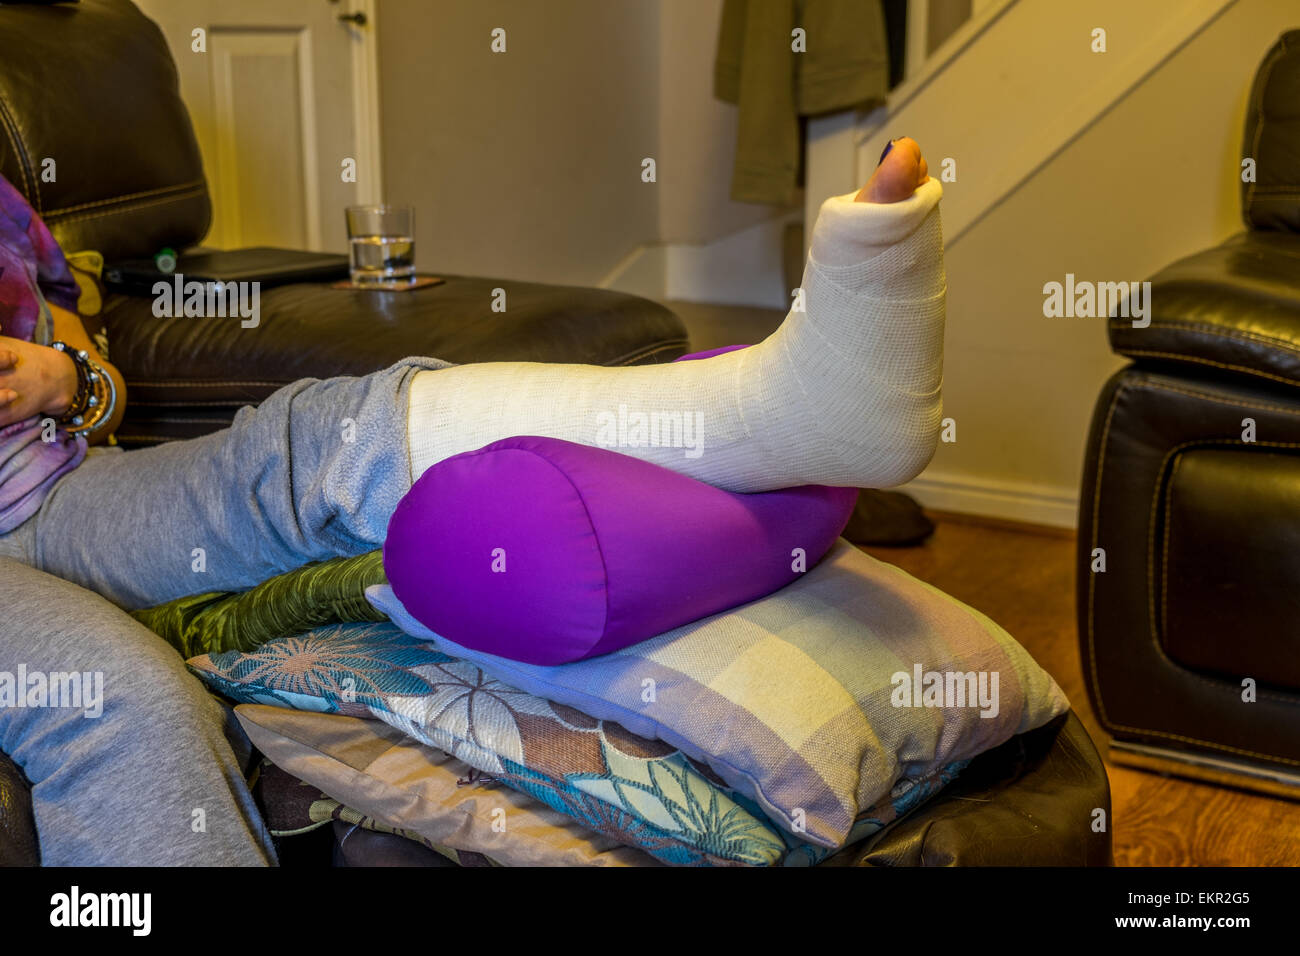 Lady with a broken ankle with her leg in an elevated position Stock Photo